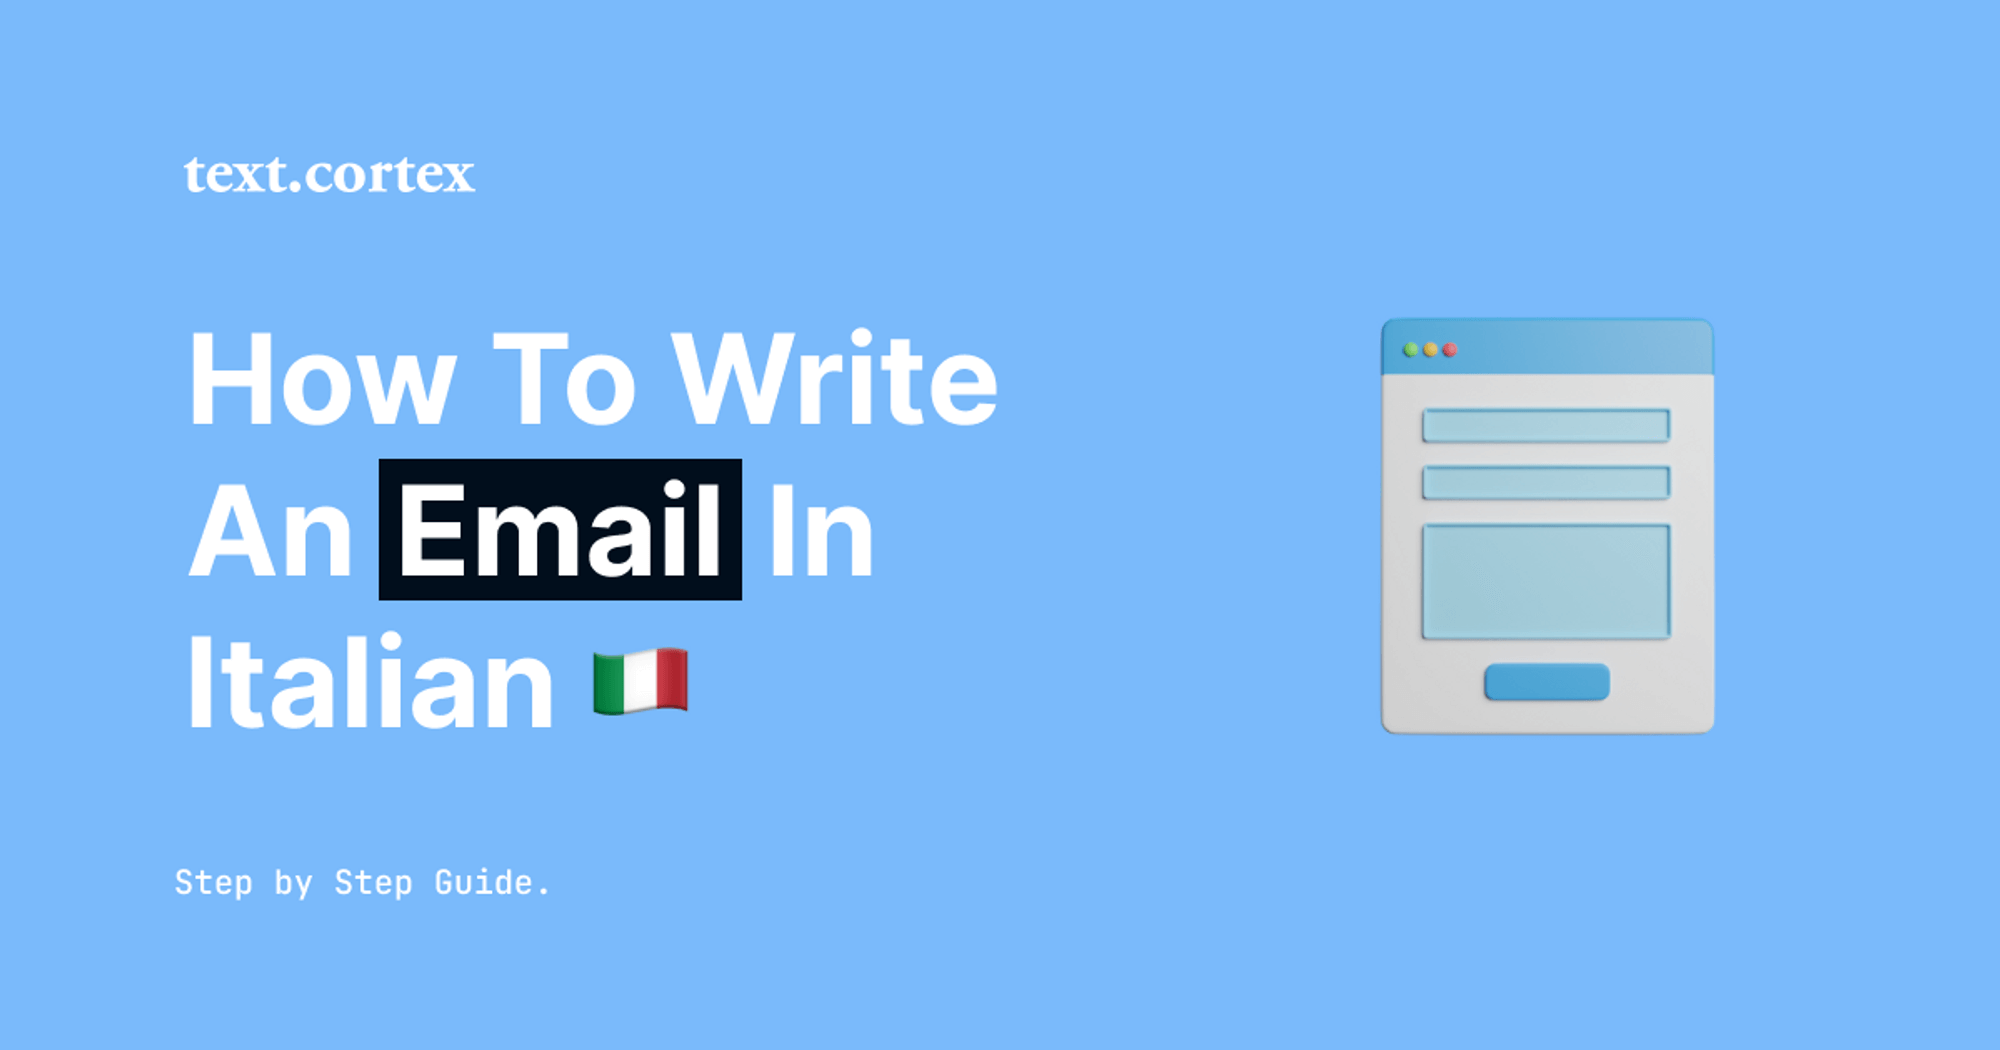 How To Write an Email in Italian - Step-by-Step Guide